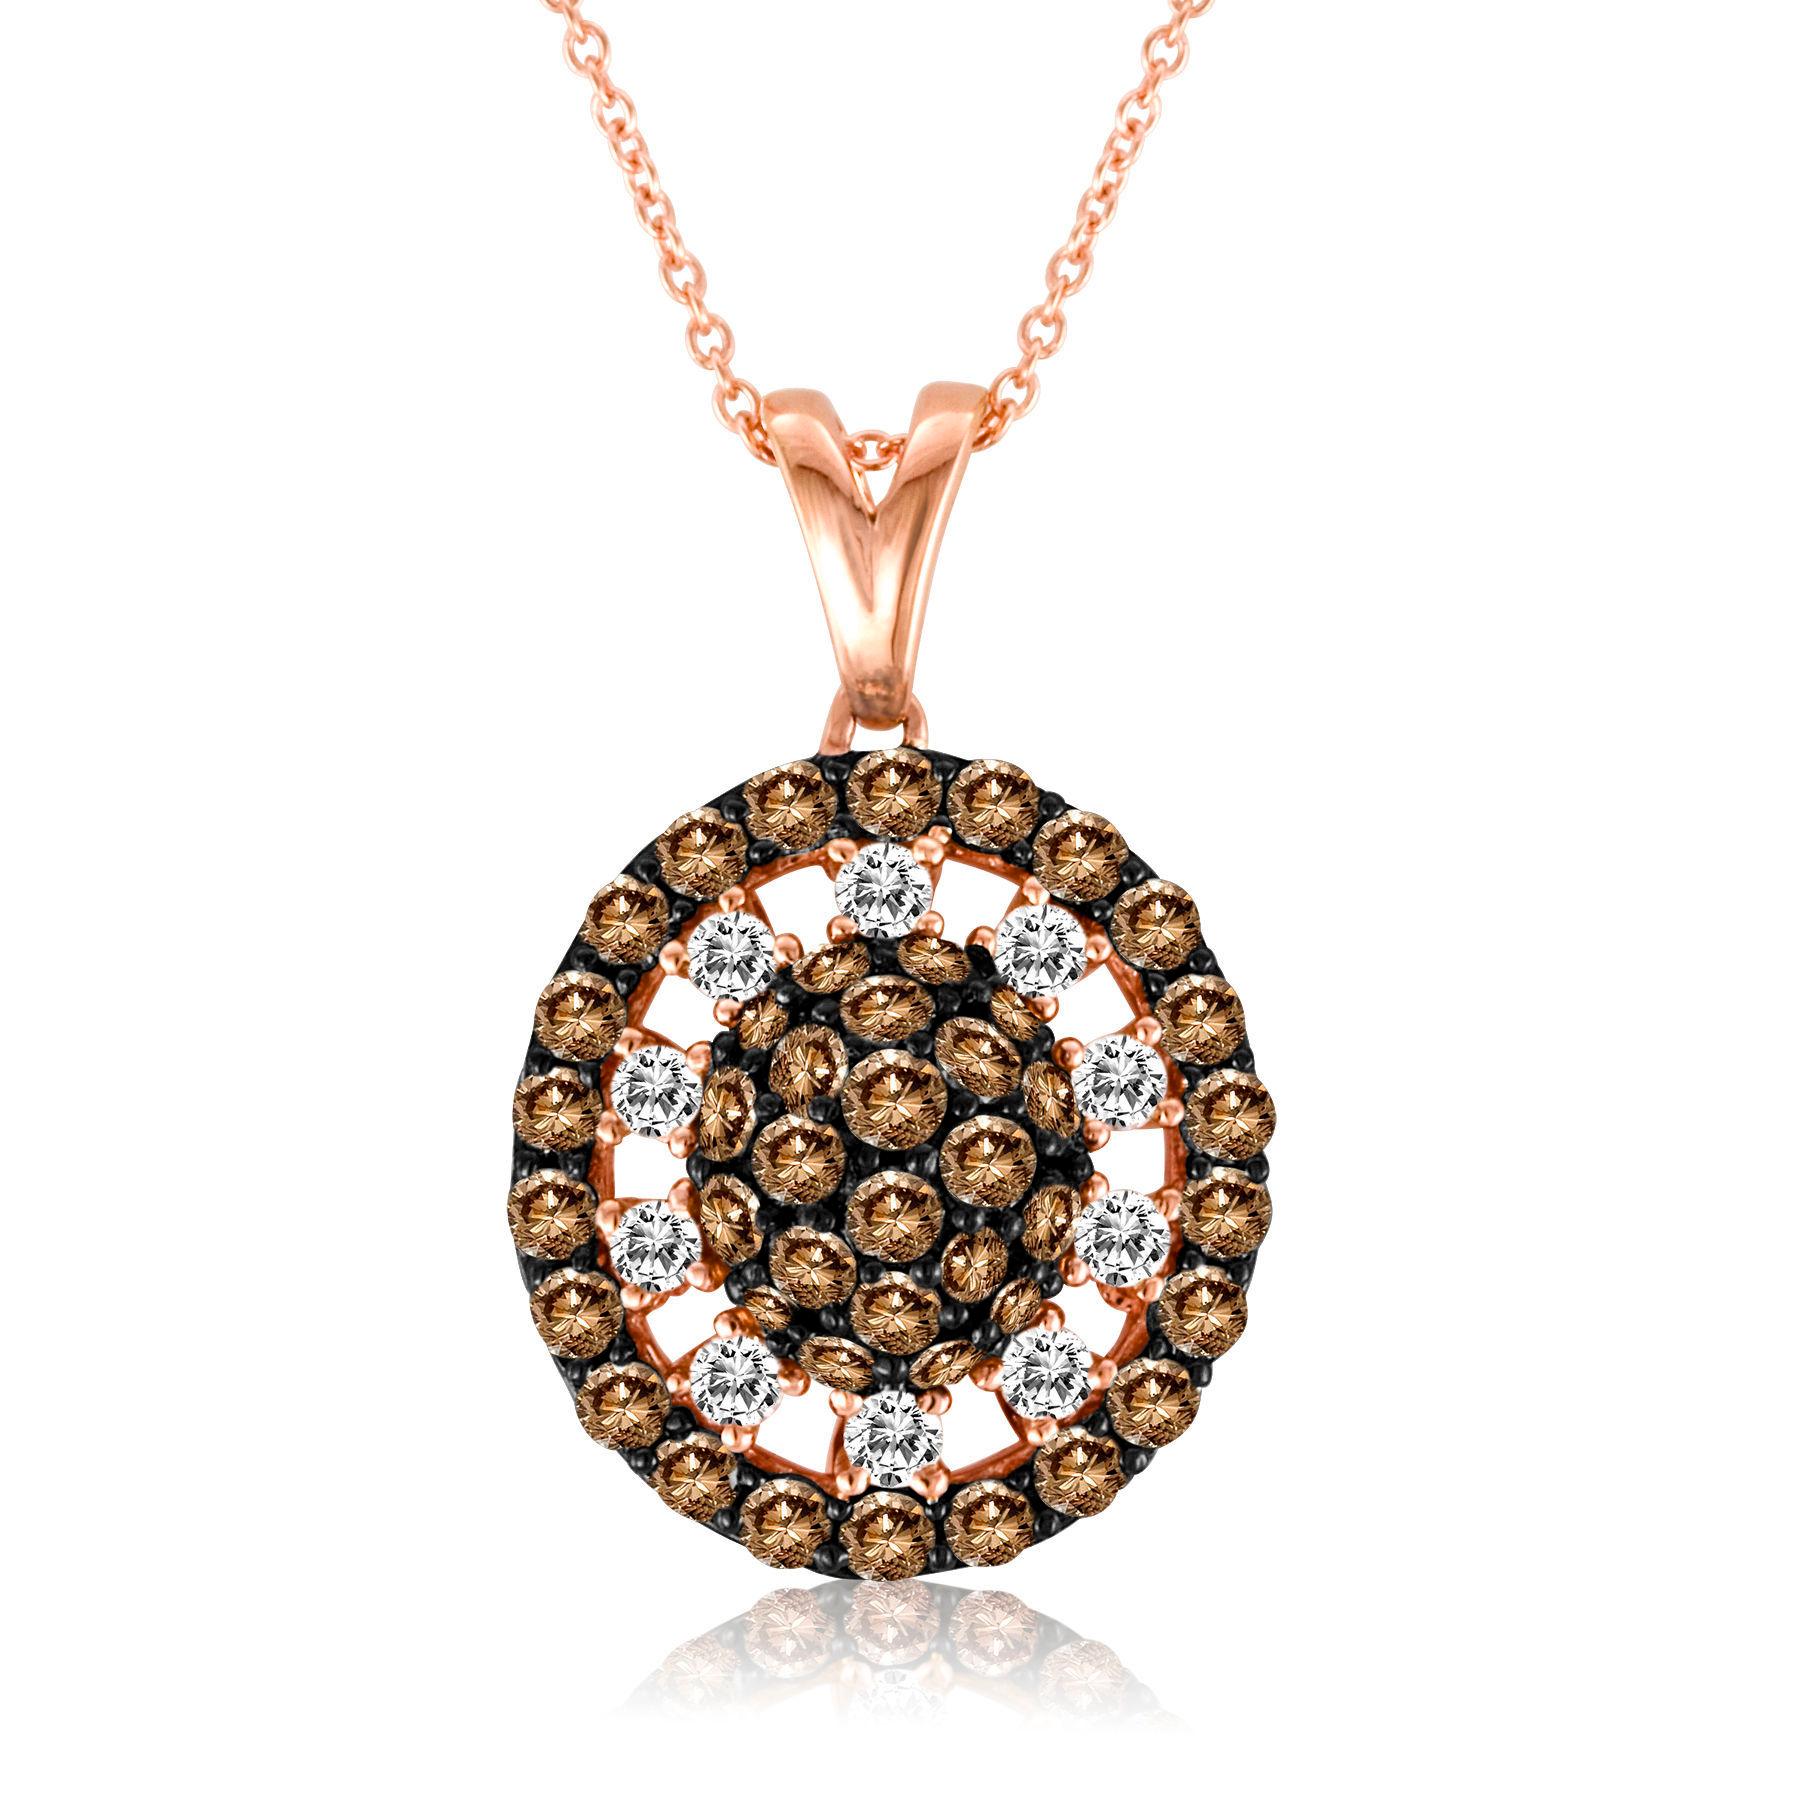 LeVian Chocolate & White Diamond Pendant in 14K Rose Gold-1 3/4 Cts For Sale